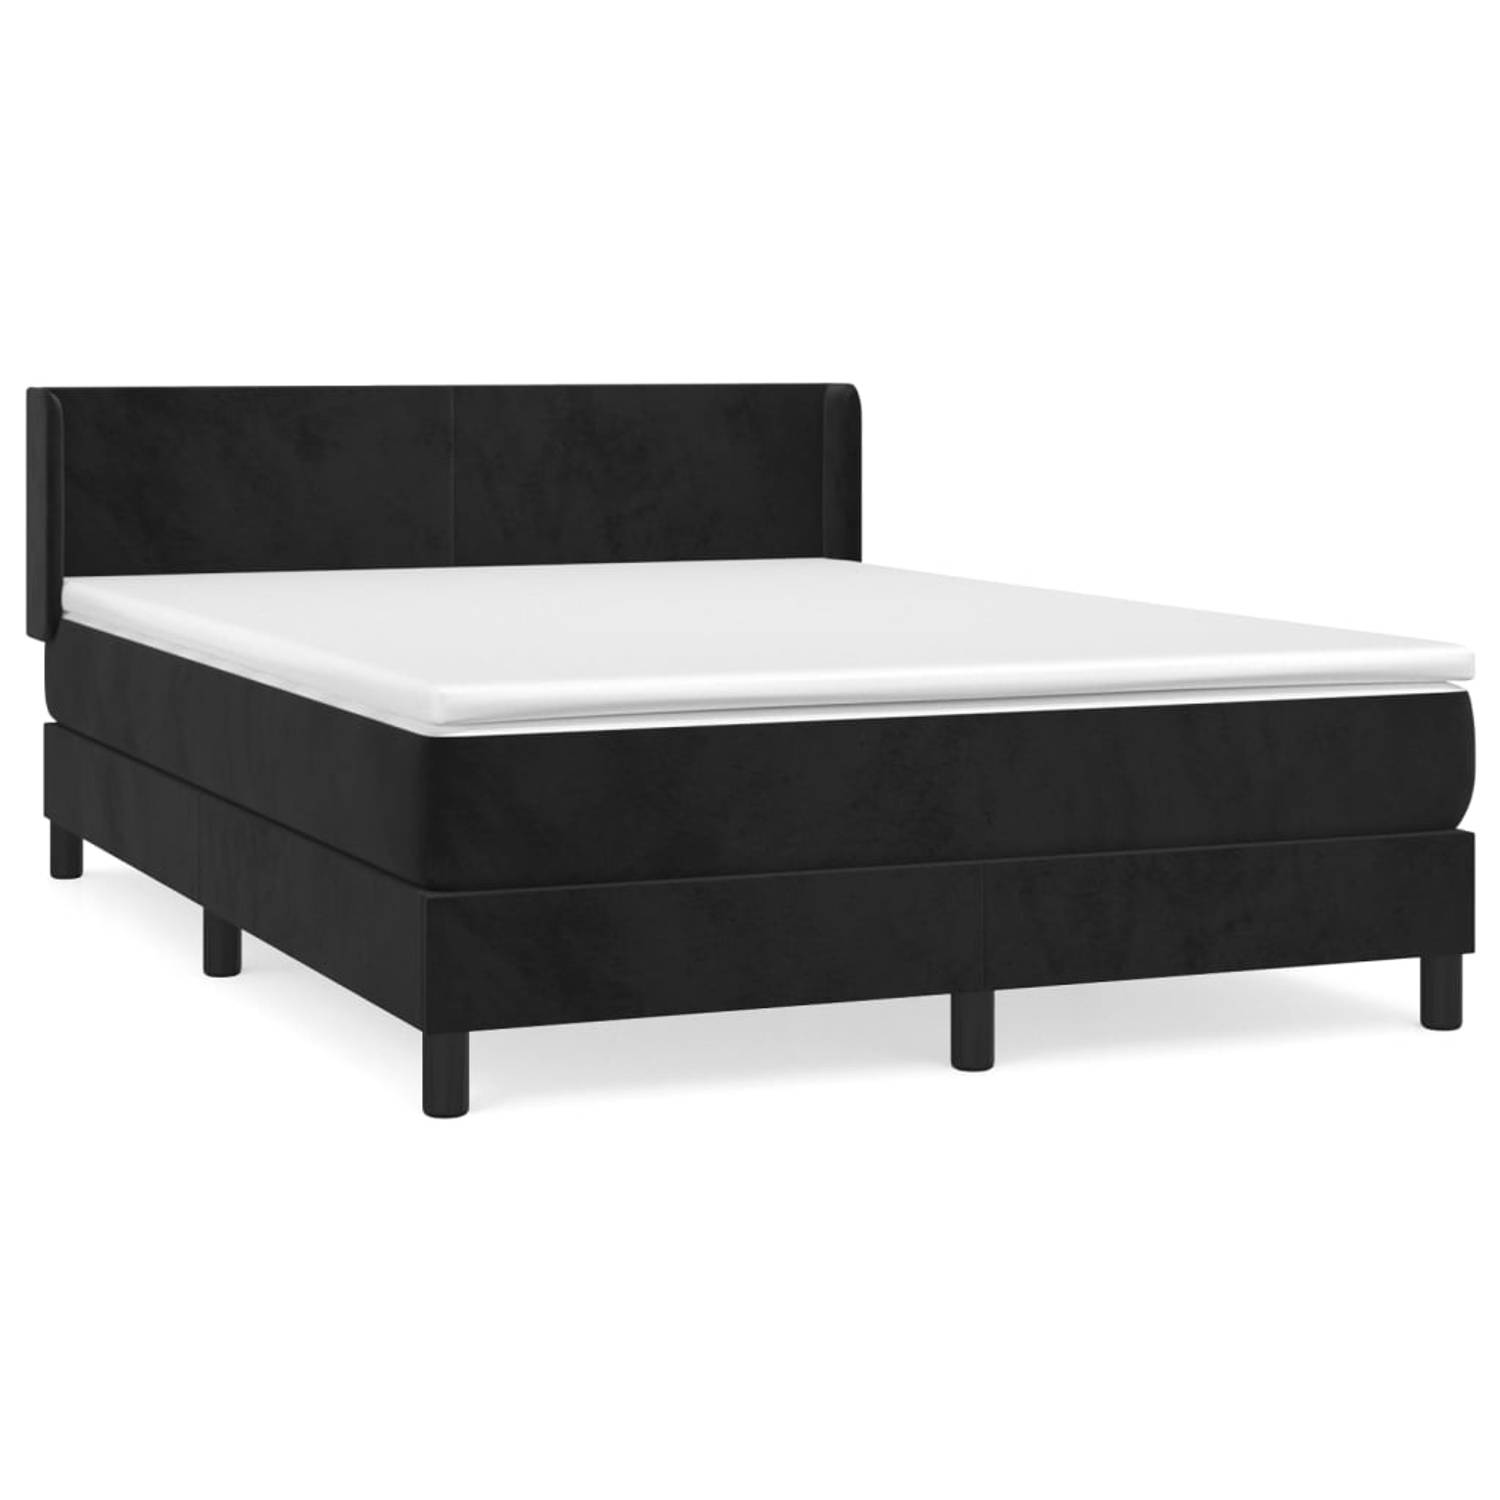 The Living Store Boxspringbed - - Bed - 193 x 147 x 78/88 cm - Zwart fluweel